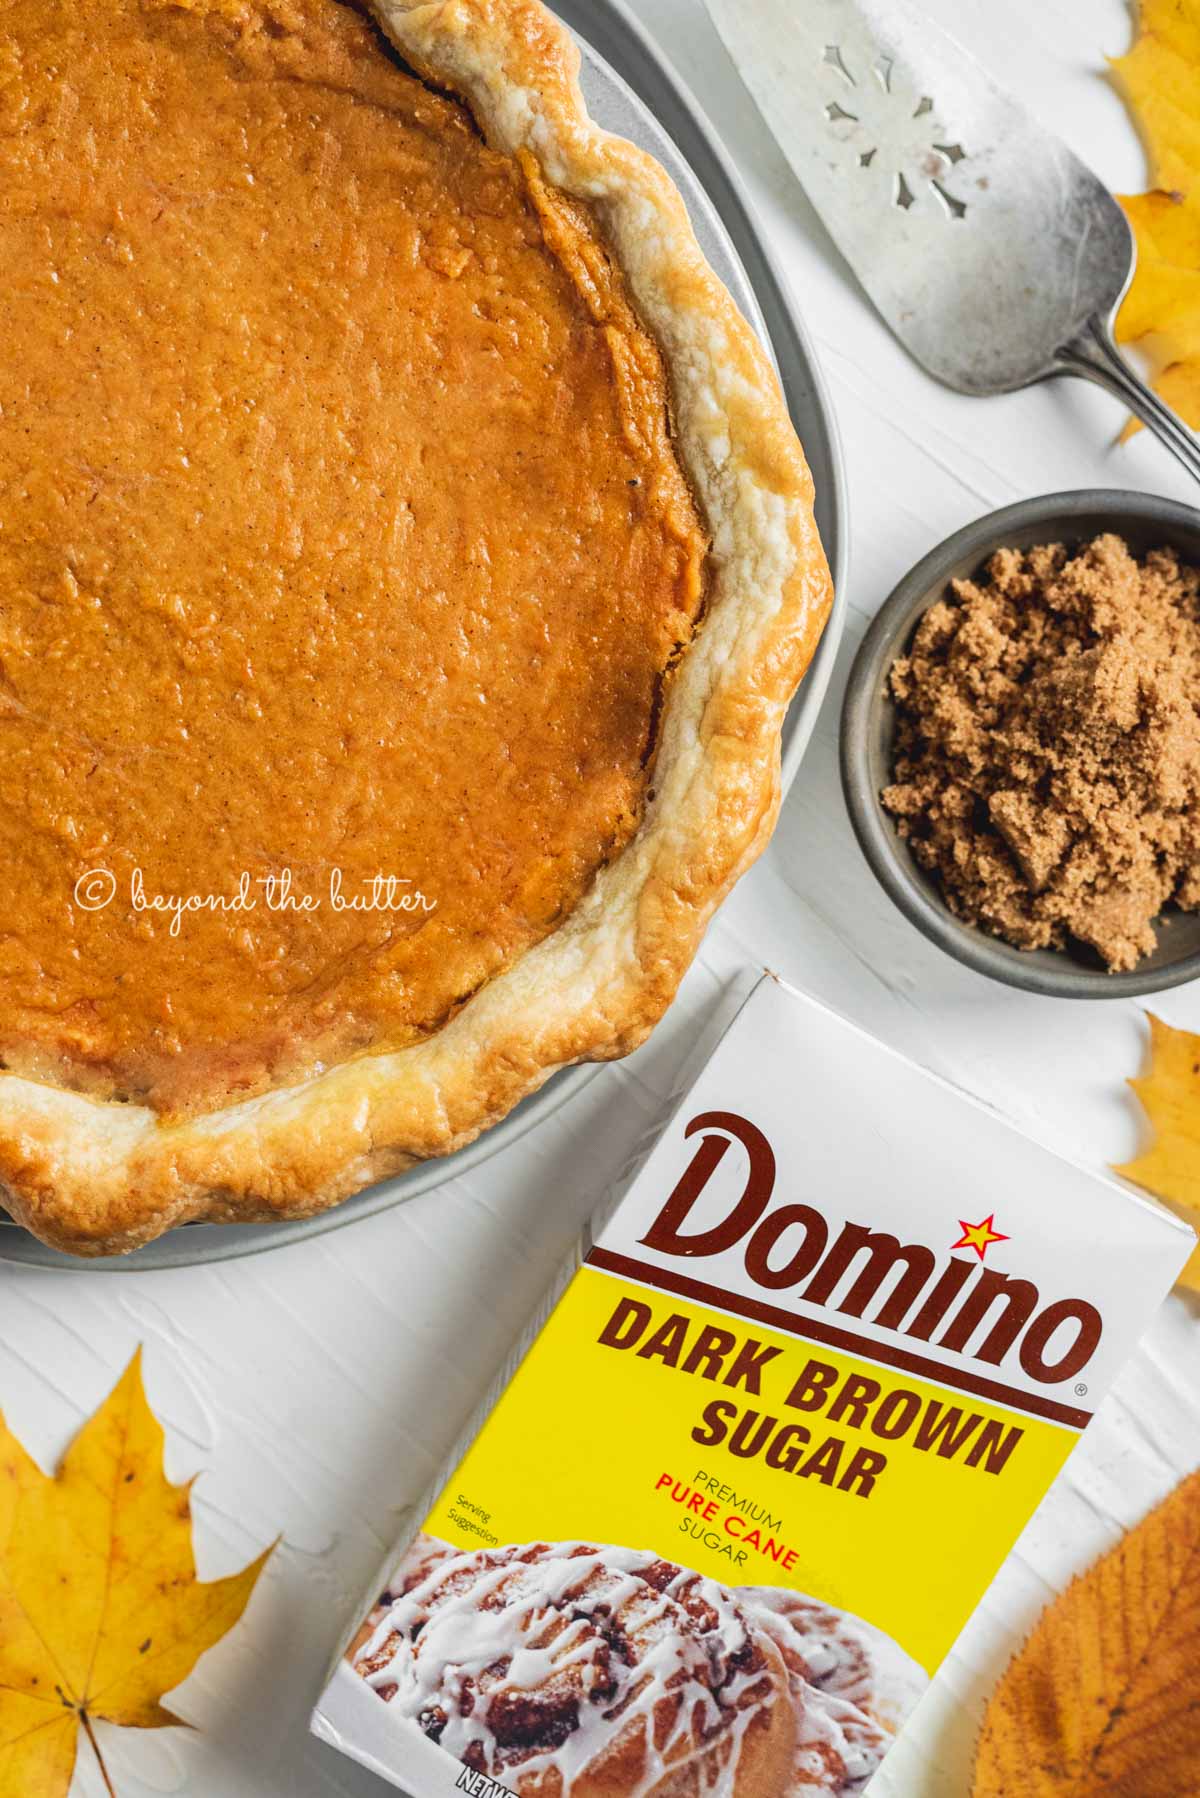 Overhead image of sweet potato pie with box of Domino® Dark Brown Sugar shown below it along with some colorful fall leaves | All Images © Beyond the Butter®